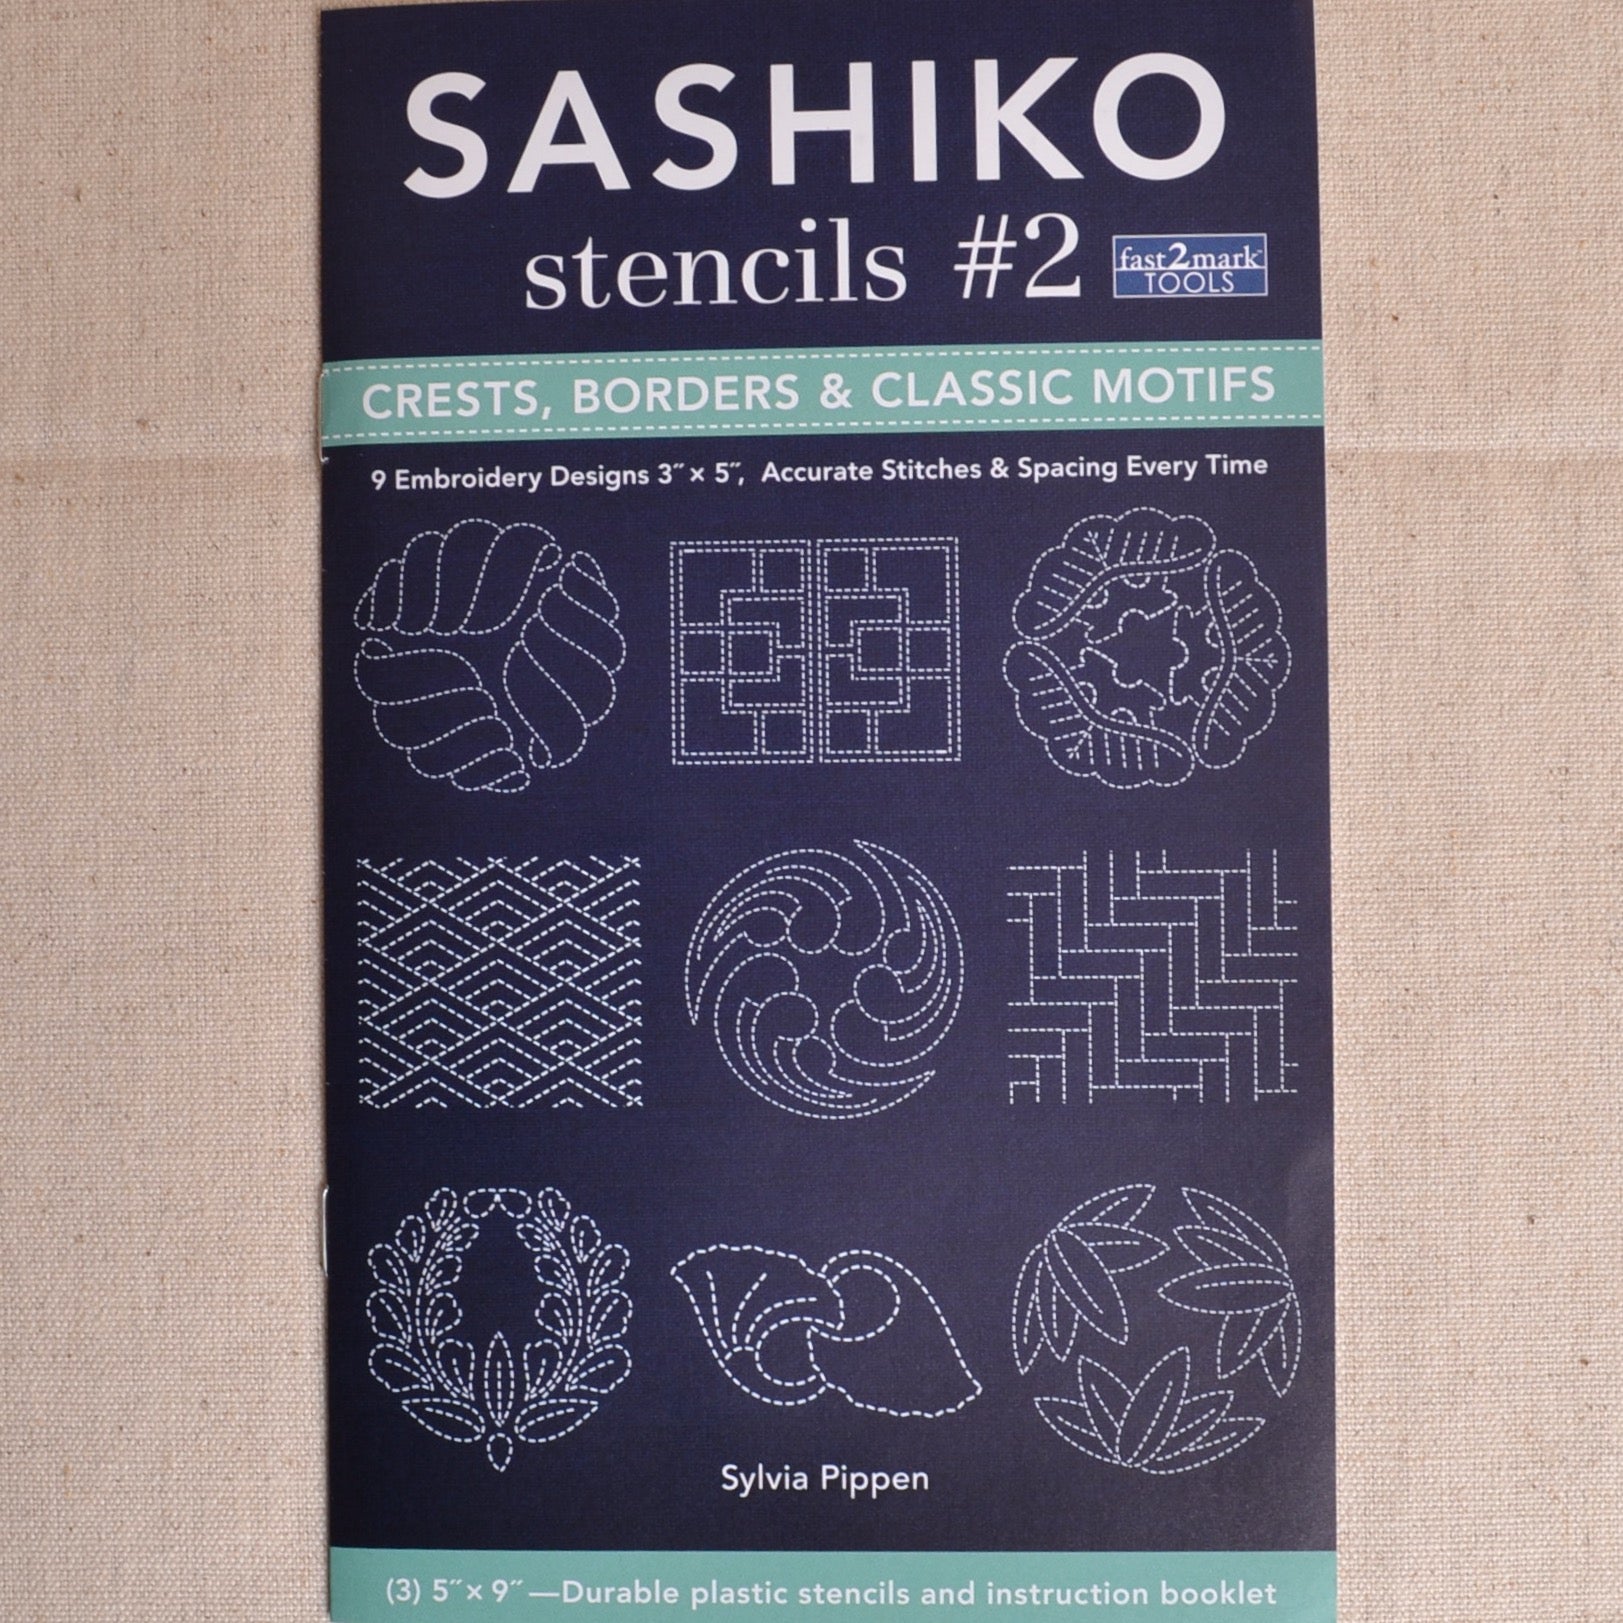 Linked Crosses Sashiko Template - Patterns and Stencils